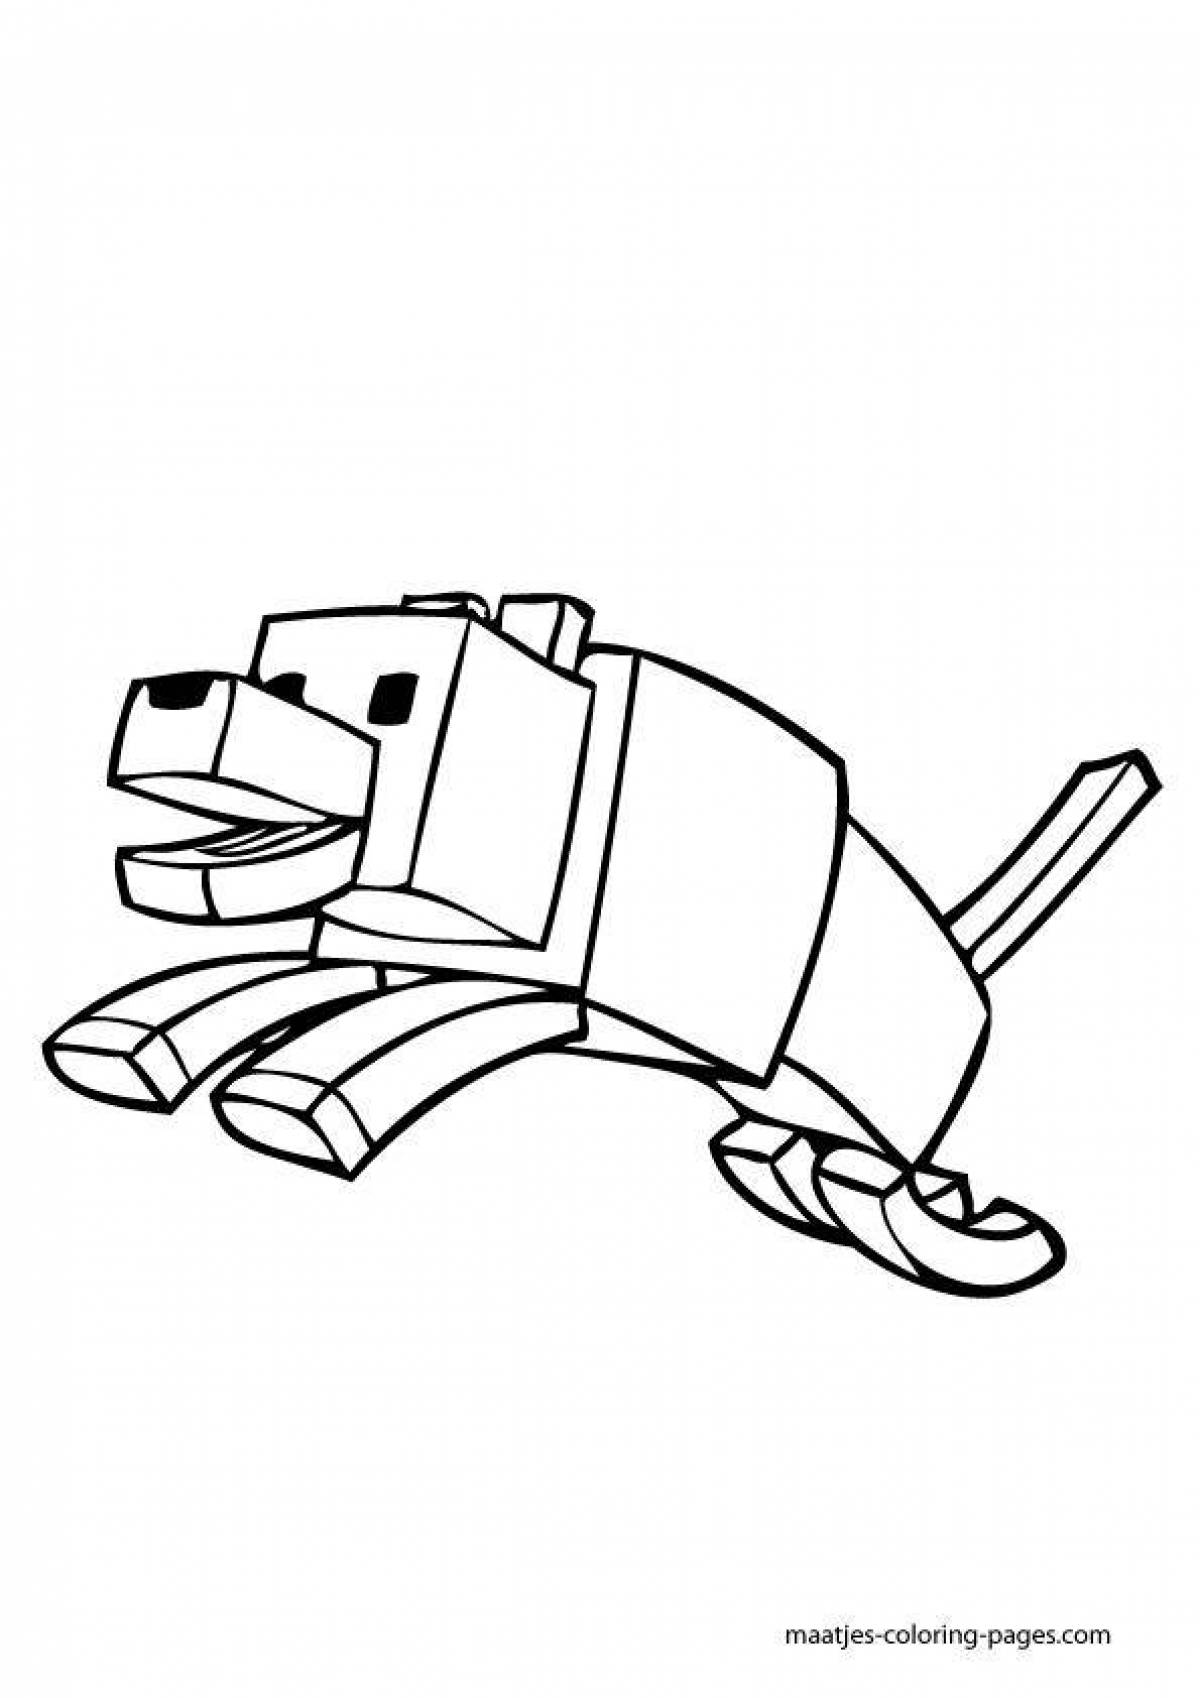 Adorable minecraft dog coloring page